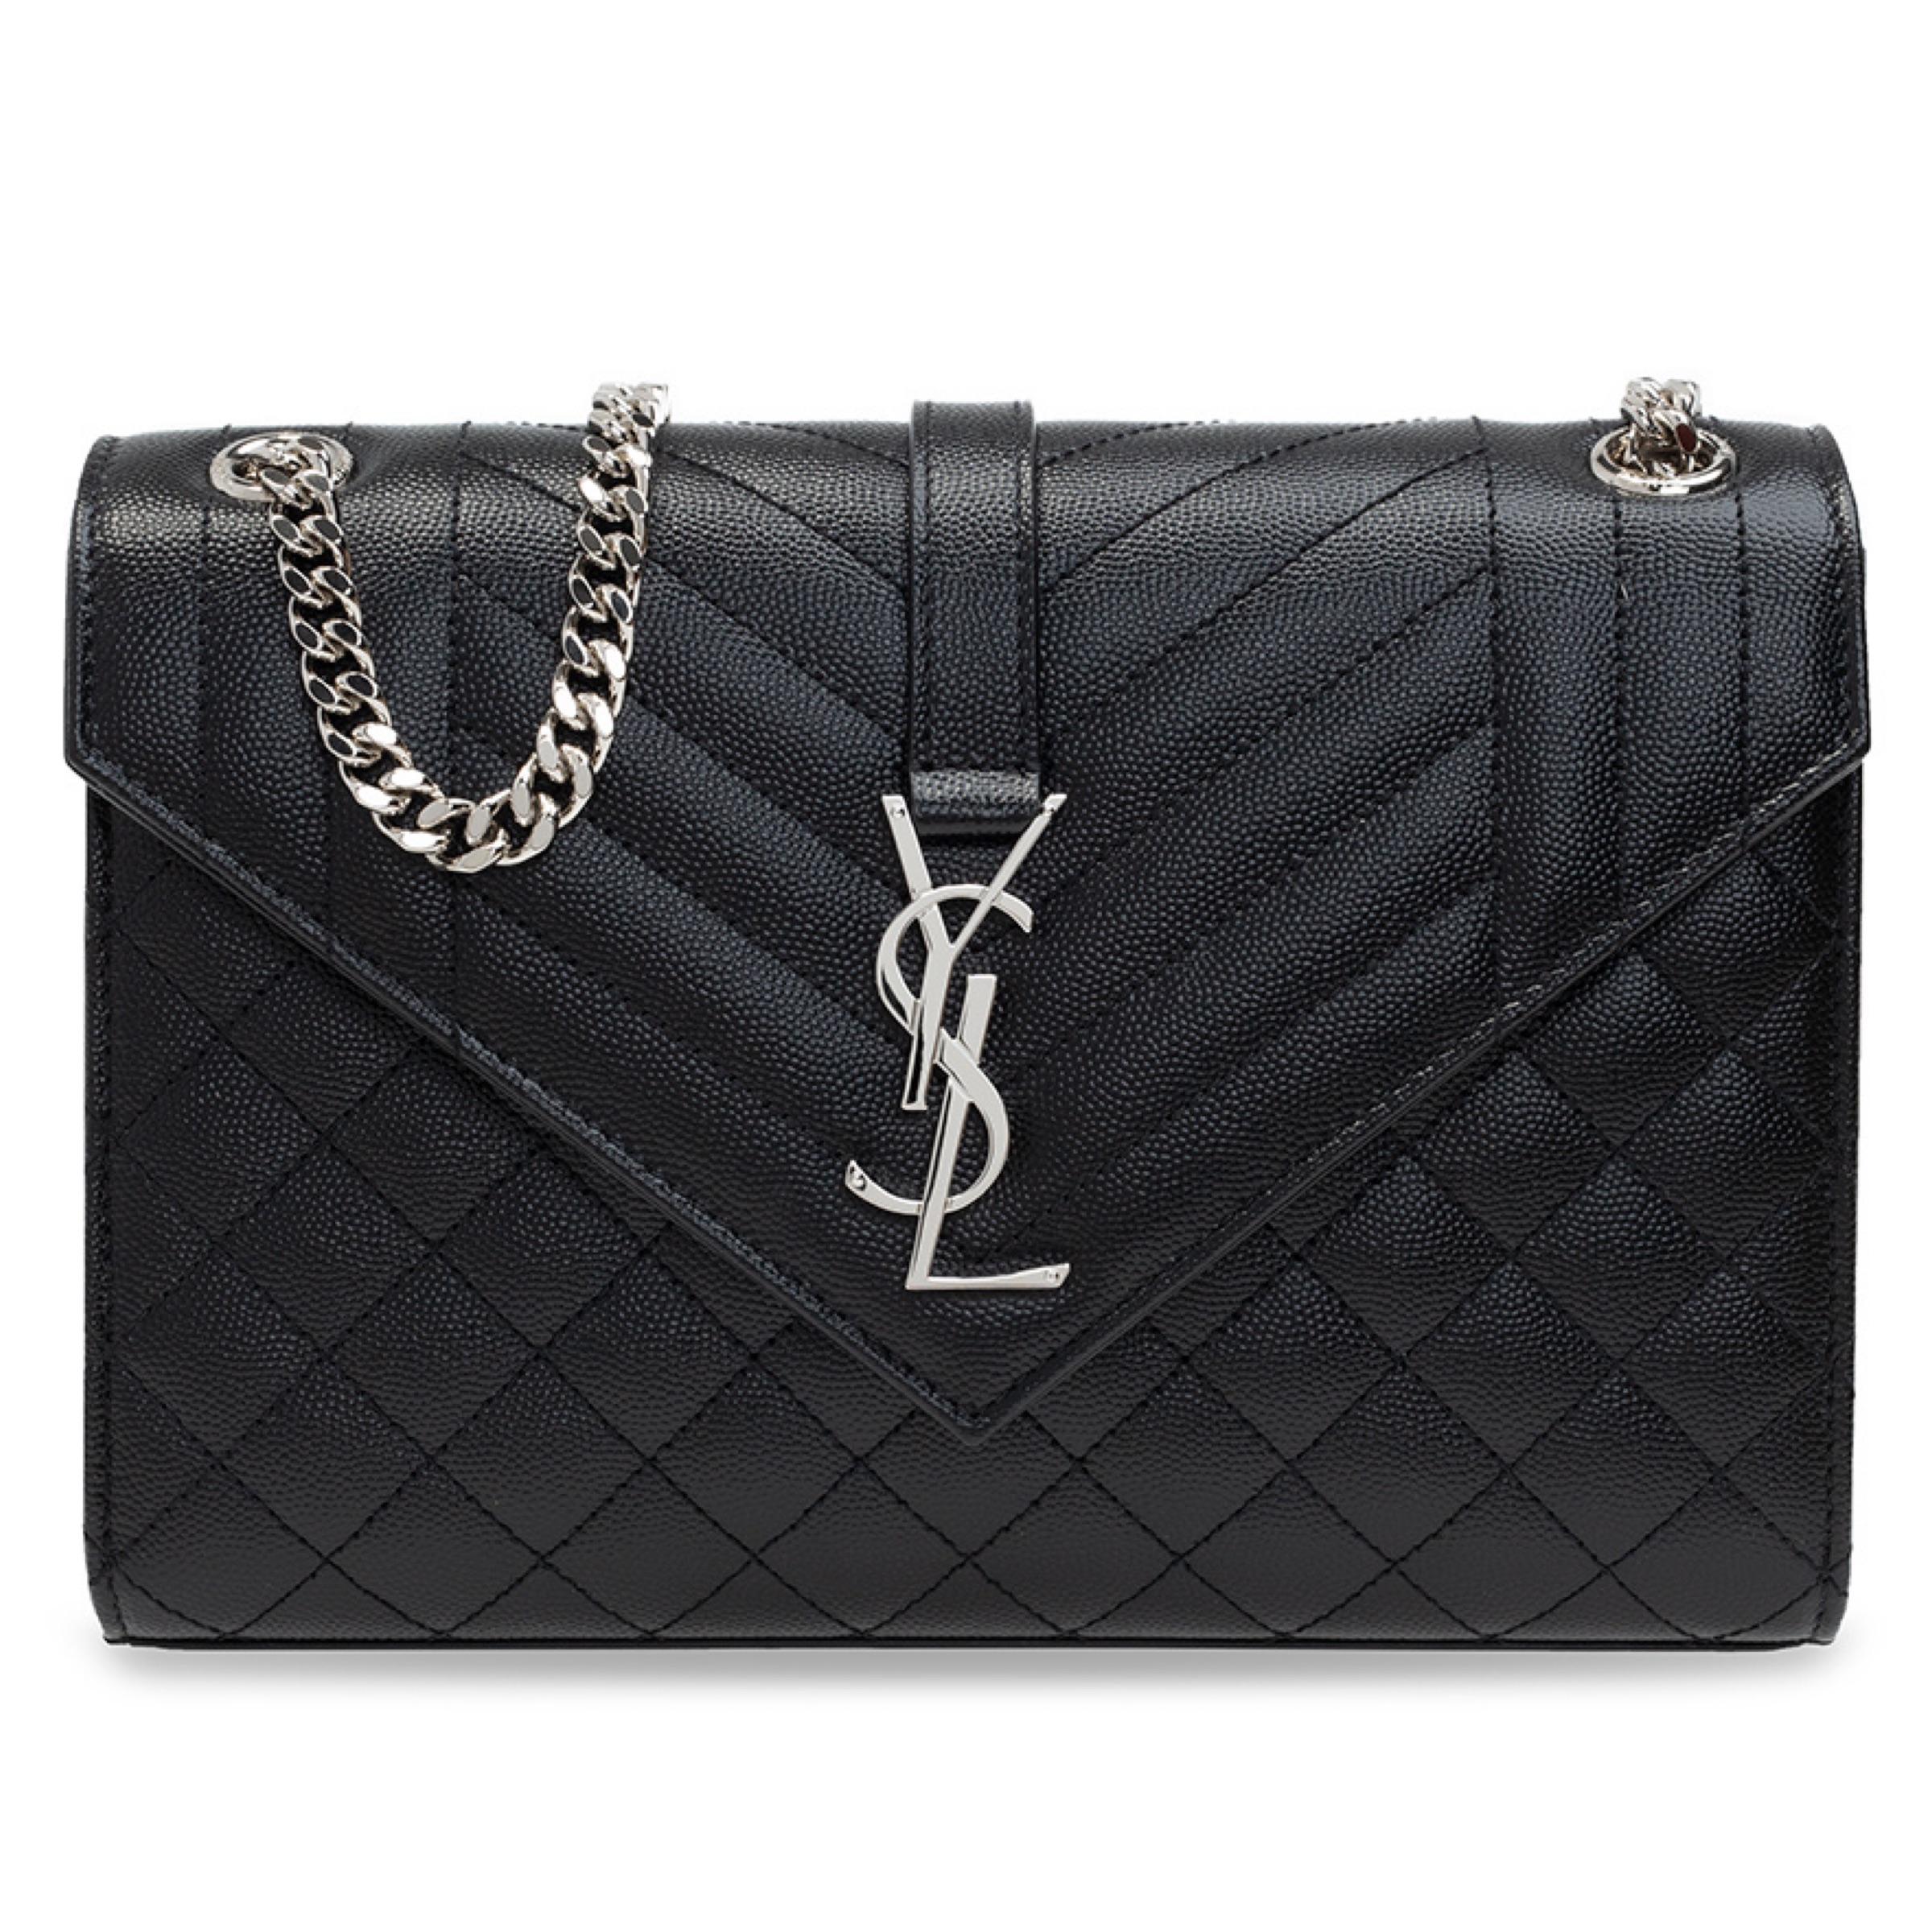 New Saint Laurent Black Envelope Medium Chain Leather Crossbody Shoulder Bag

Authenticity Guaranteed

DETAILS
Brand: Saint Laurent
Gender: Women
Category: Crossbody bag
Condition: Brand new
Color: Black
Material: Leather
Quilted leather
Front YSL